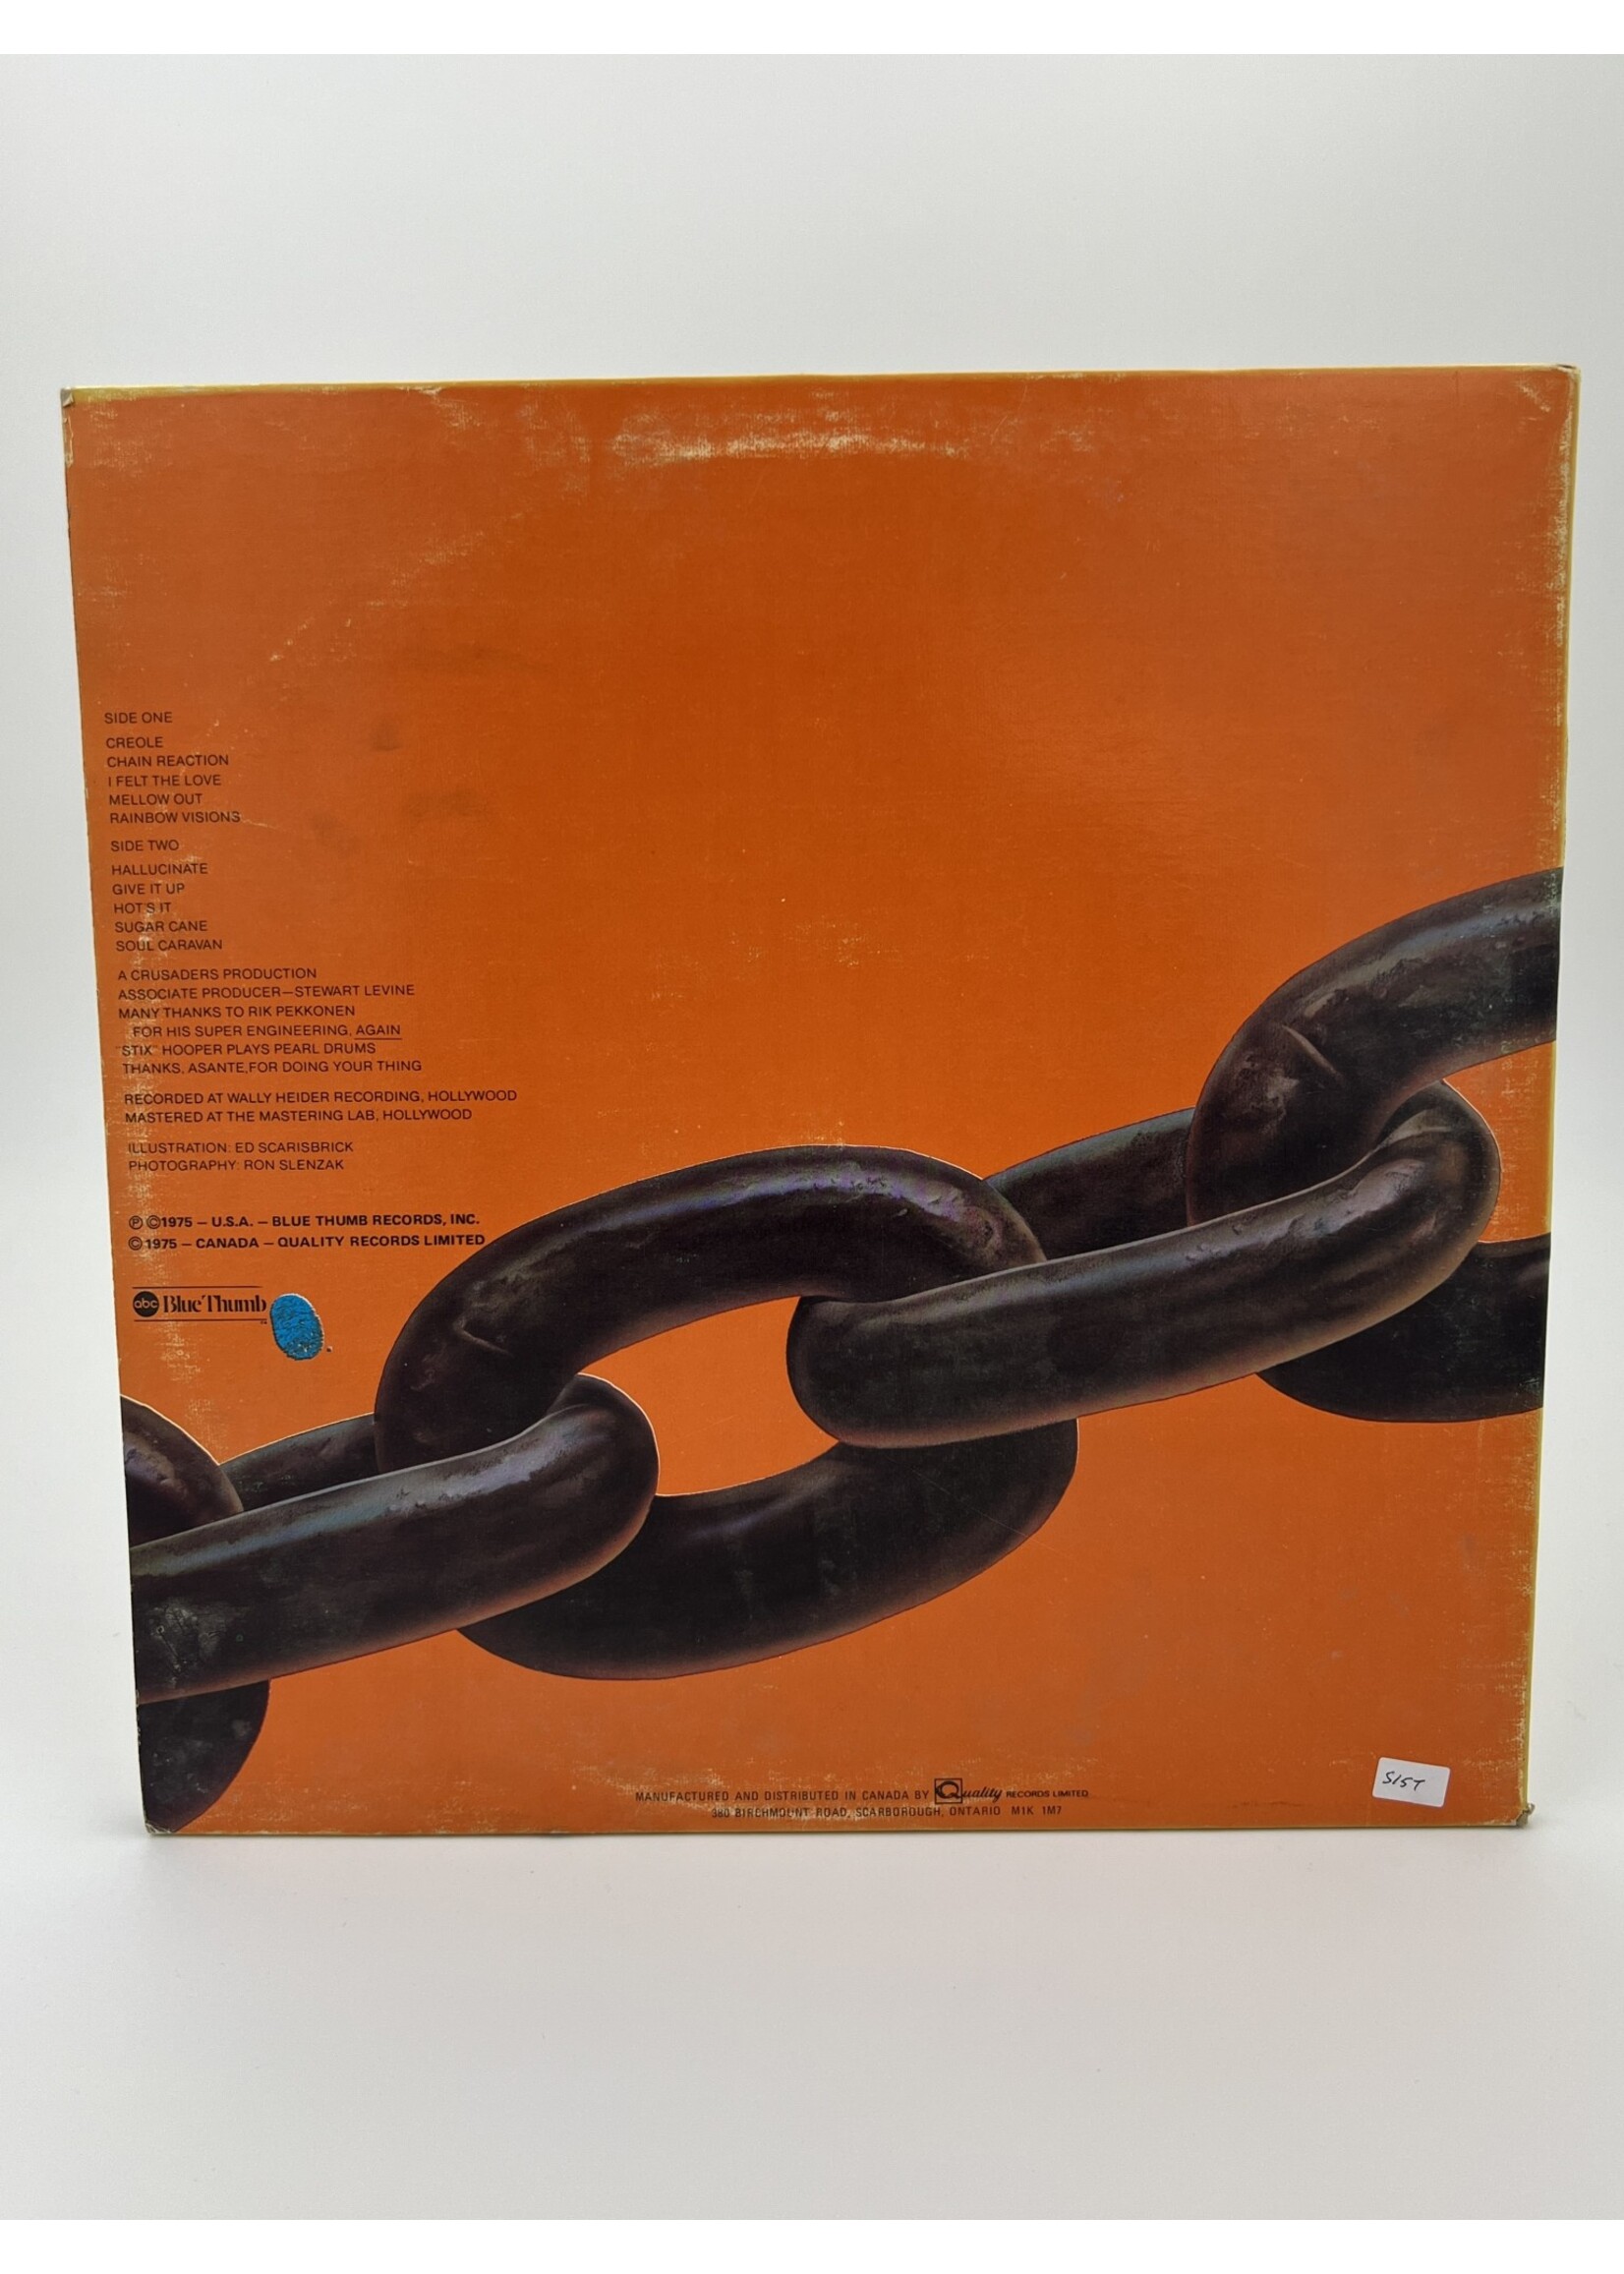 LP   The Crusaders Chain Reaction LP Record